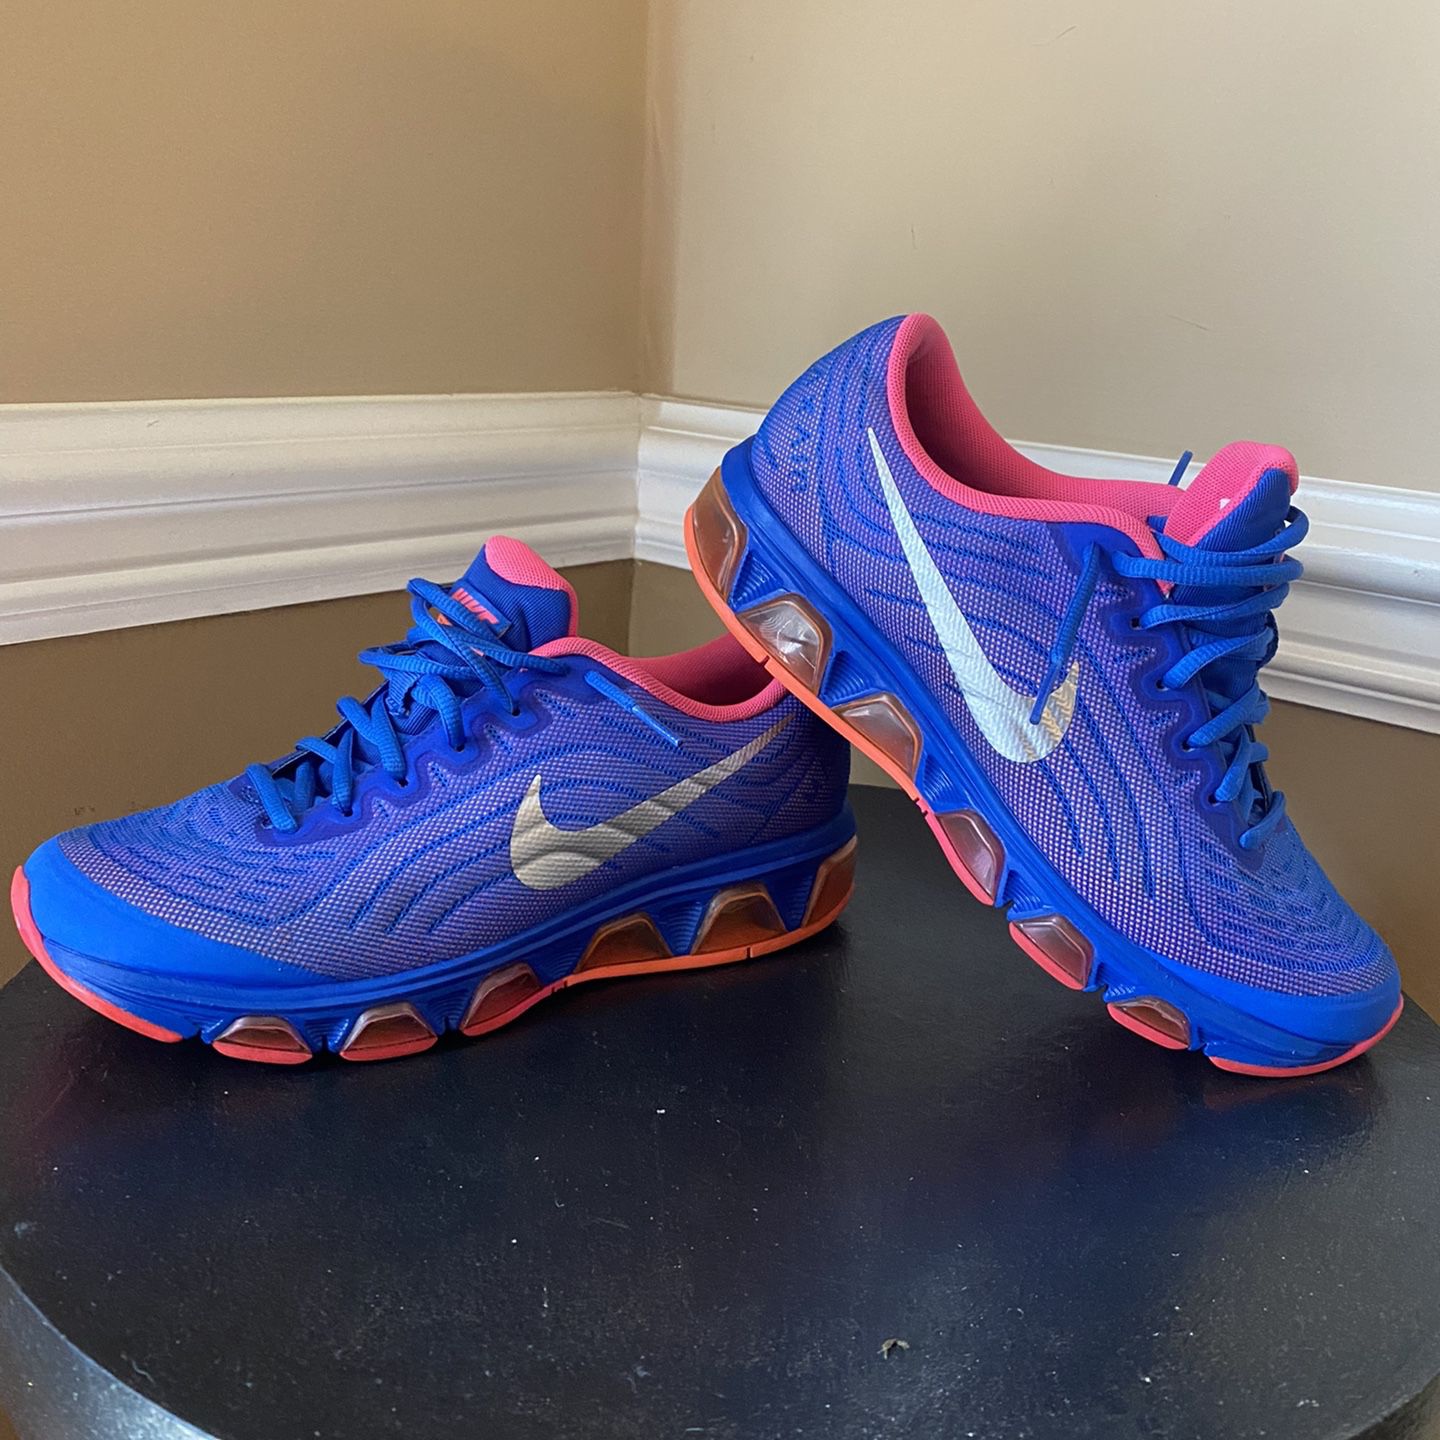 NIKE MAX TAILWIND 6 WOMEN'S RUNNING SHOES 621226 400 SIZE 8.5 for Sale in Accokeek, MD -